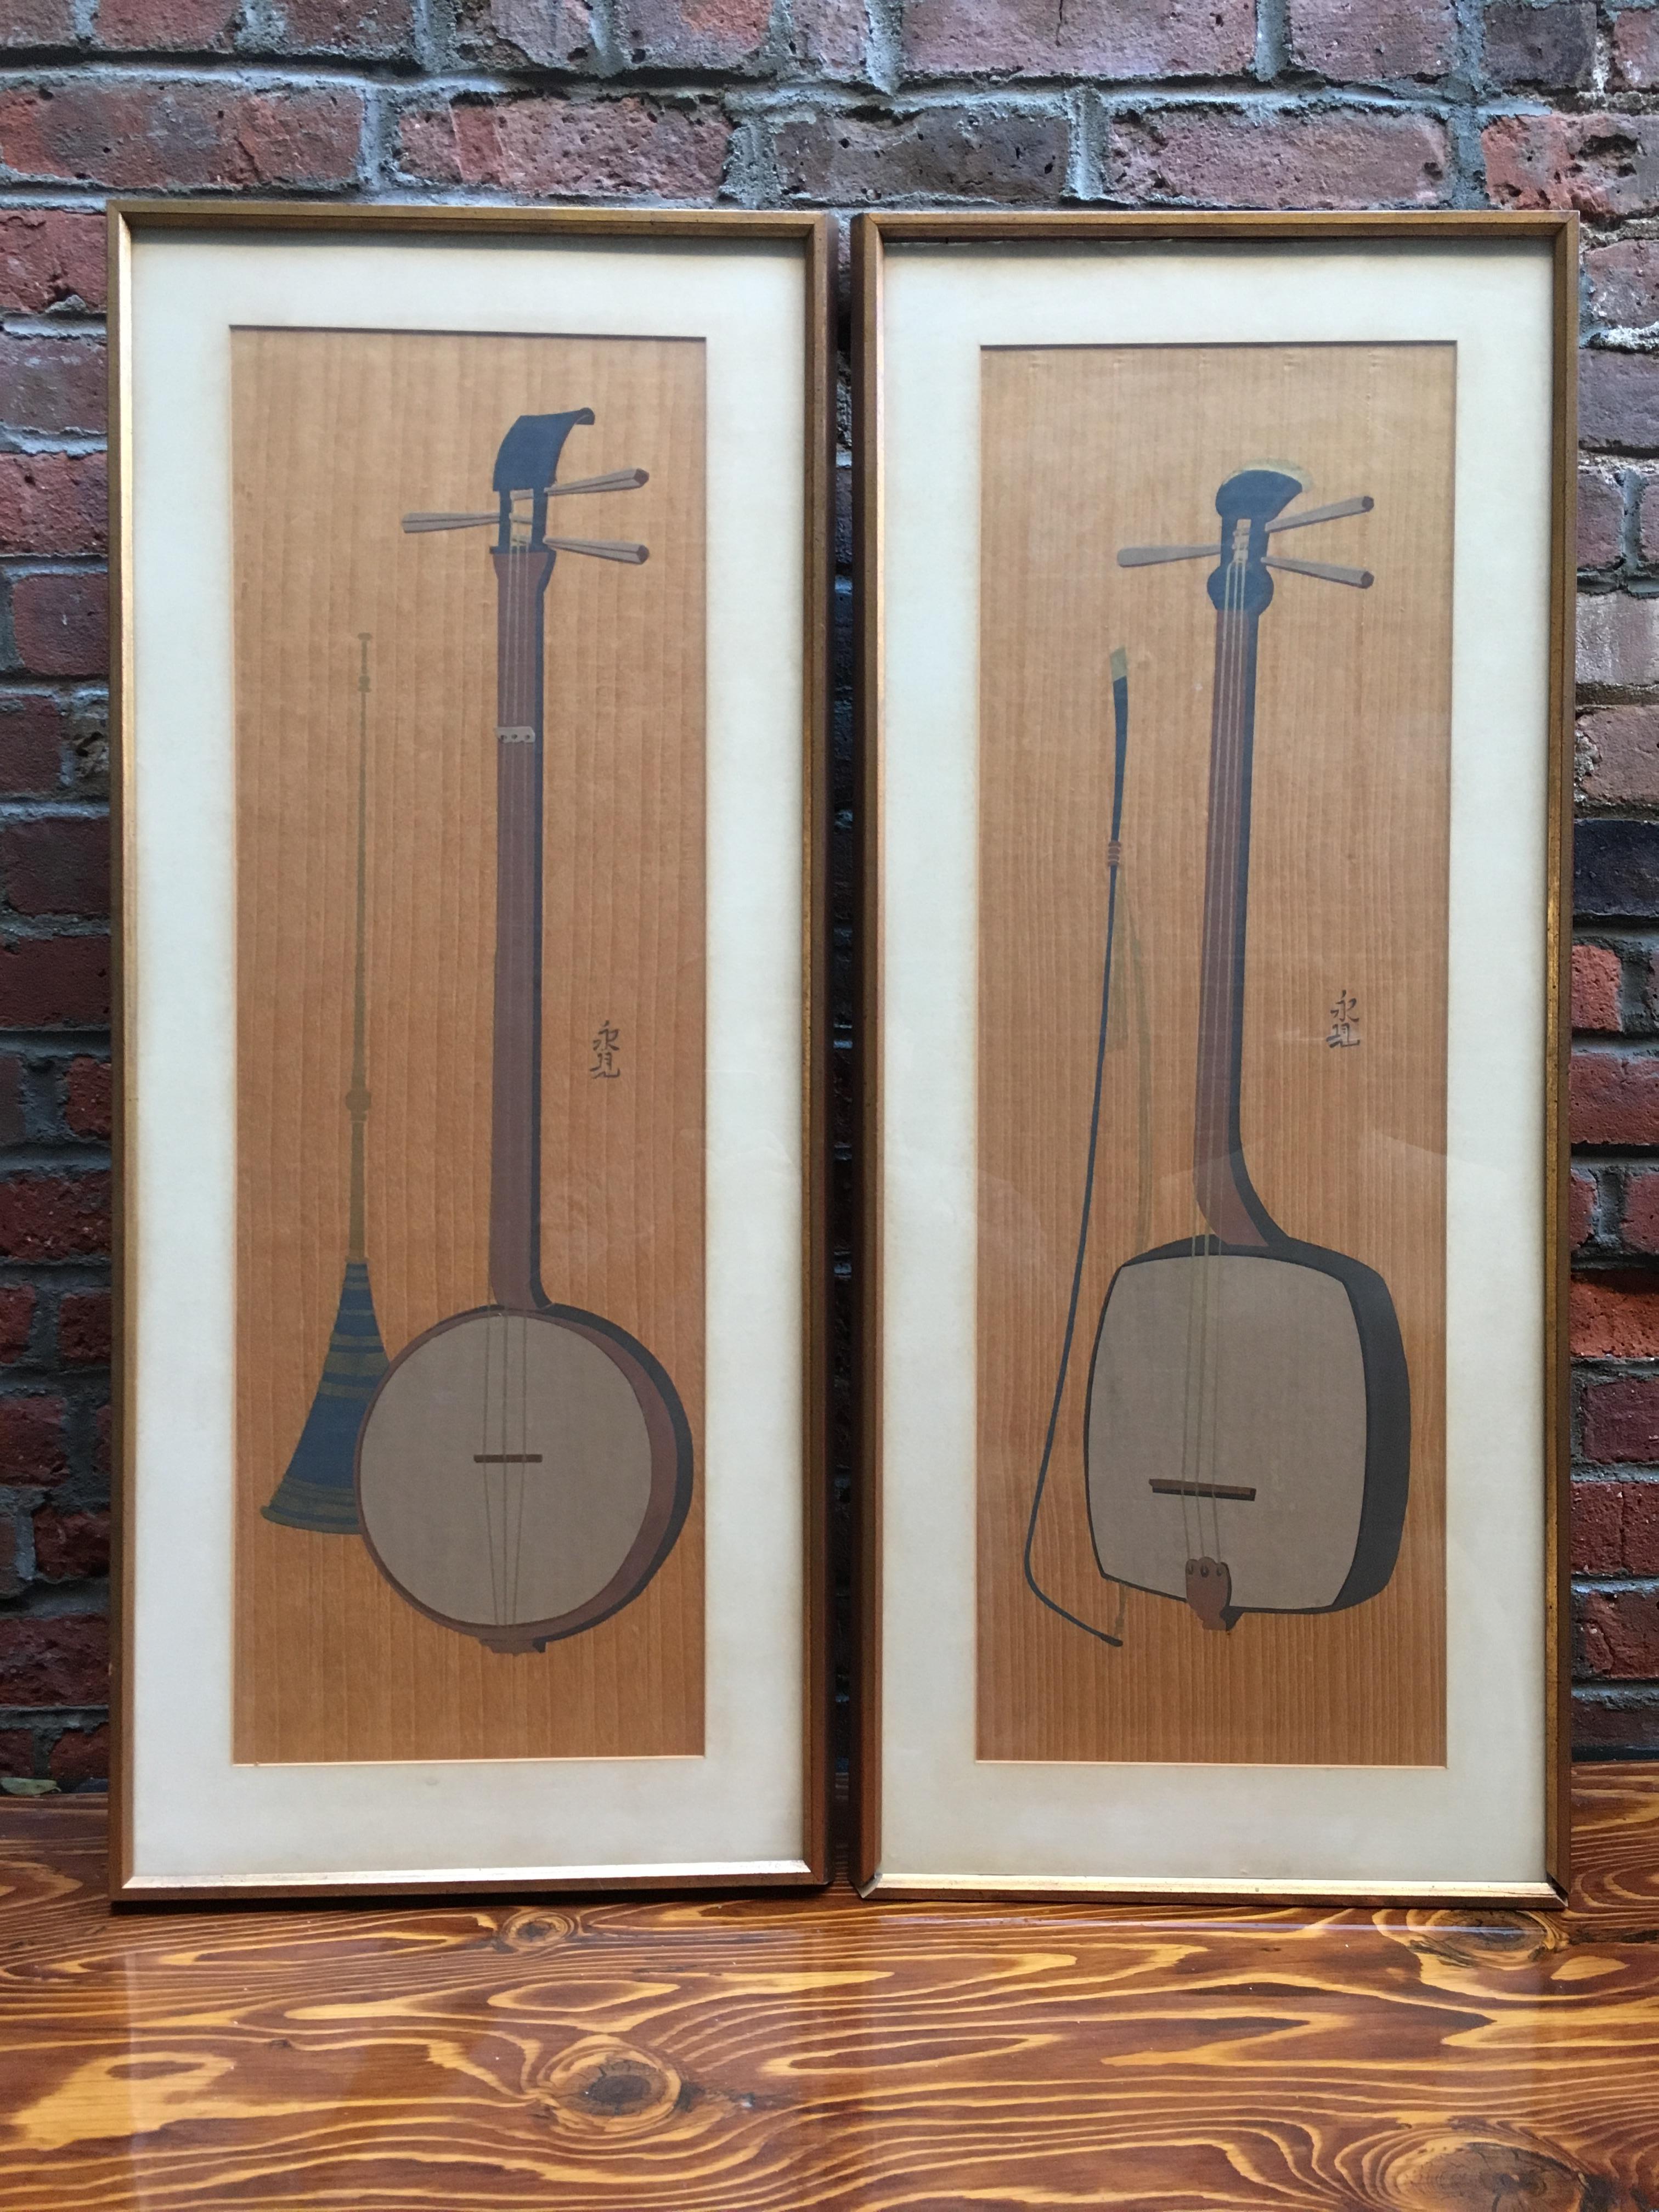 Exquisite pair of 1950s Japanese lithographs on Cherry wood veneer of the traditional Japanese three stringed instruments called Sanshin or Shamisen. Matted, glazed and framed in simple gilded wood moldings. Both are signed with Japanese characters.